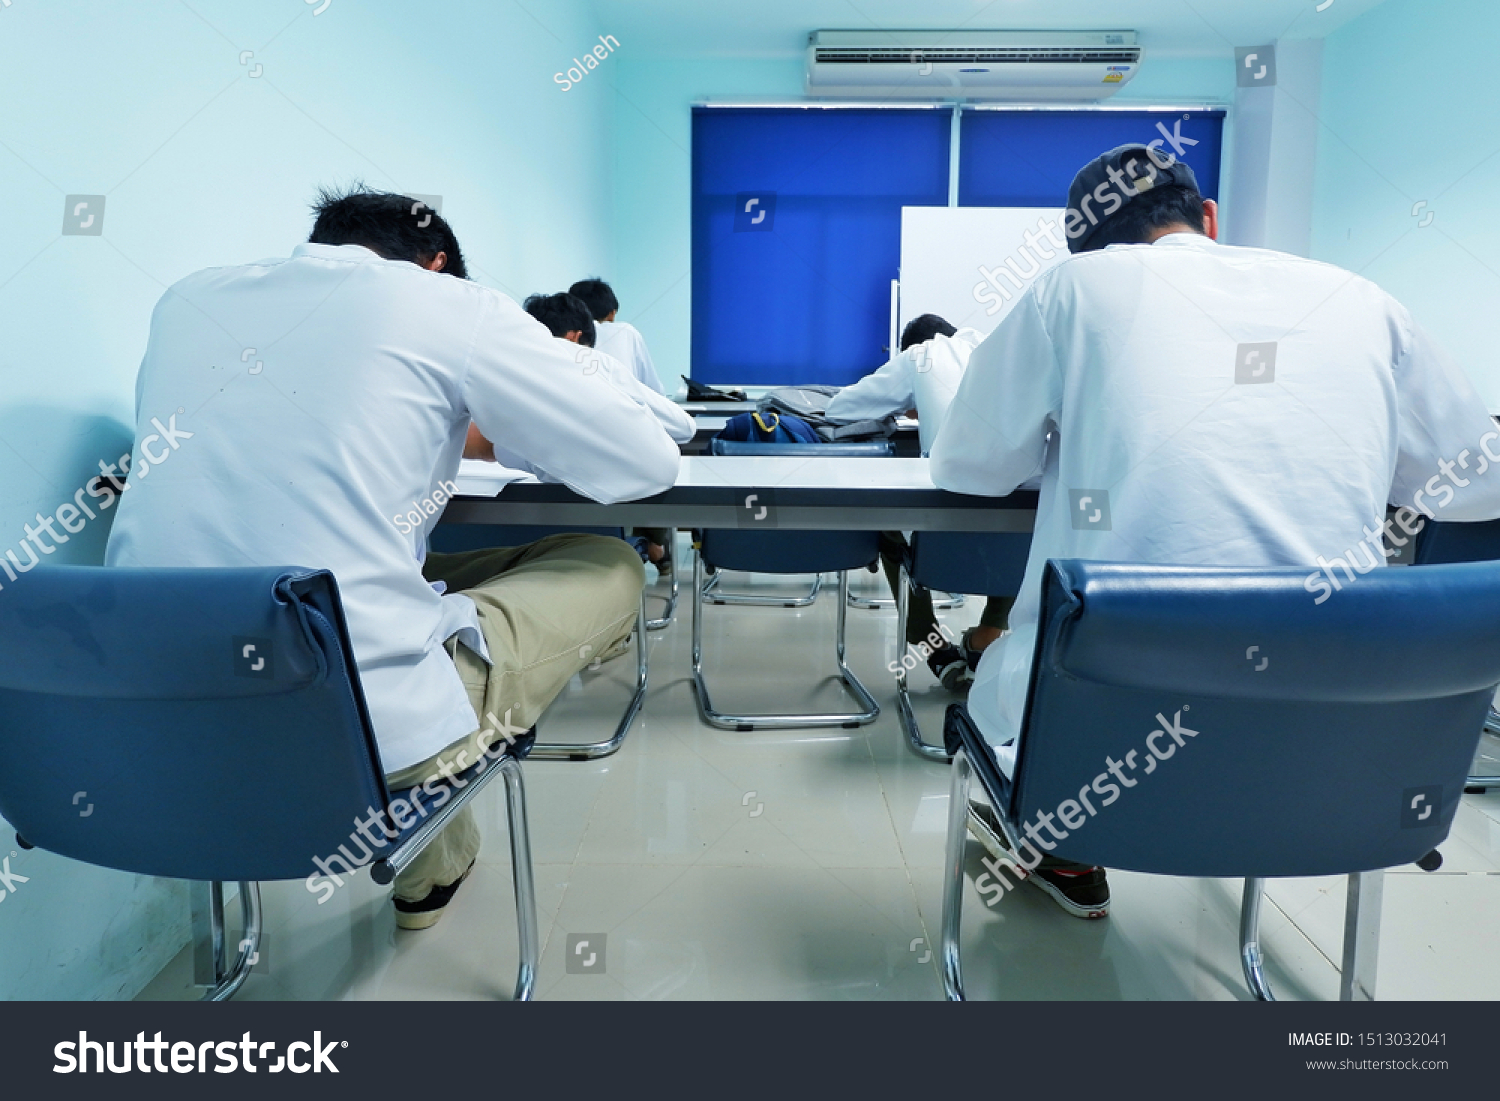 Asian students  Intently taking the examination on the table in the room #1513032041